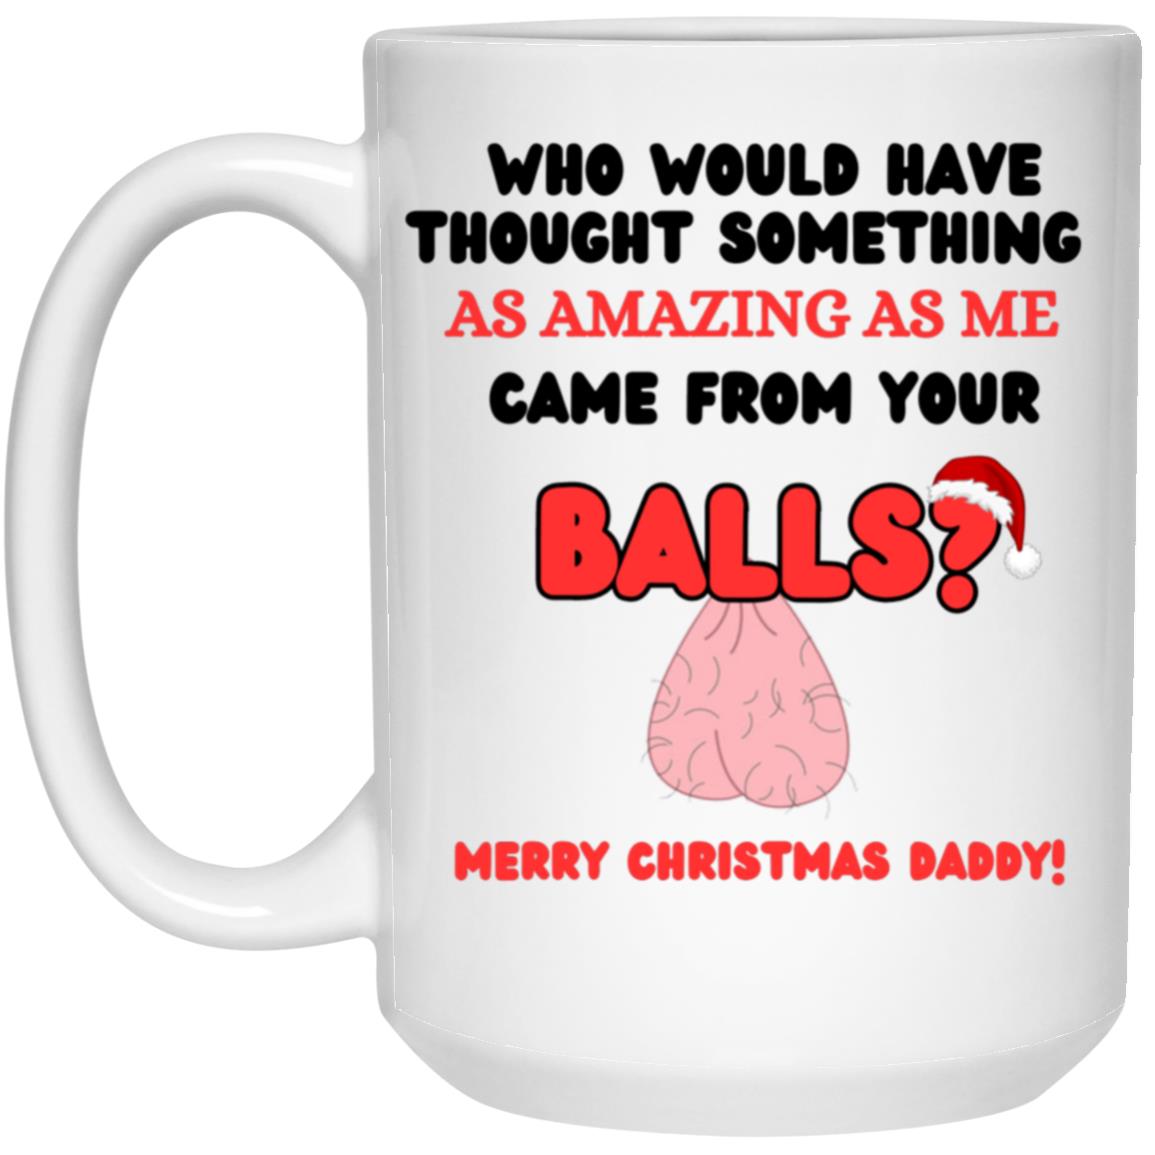 Get trendy with Who would have thought...balls  Gag gift Mug for dad - Drinkware available at Good Gift Company. Grab yours for $15 today!